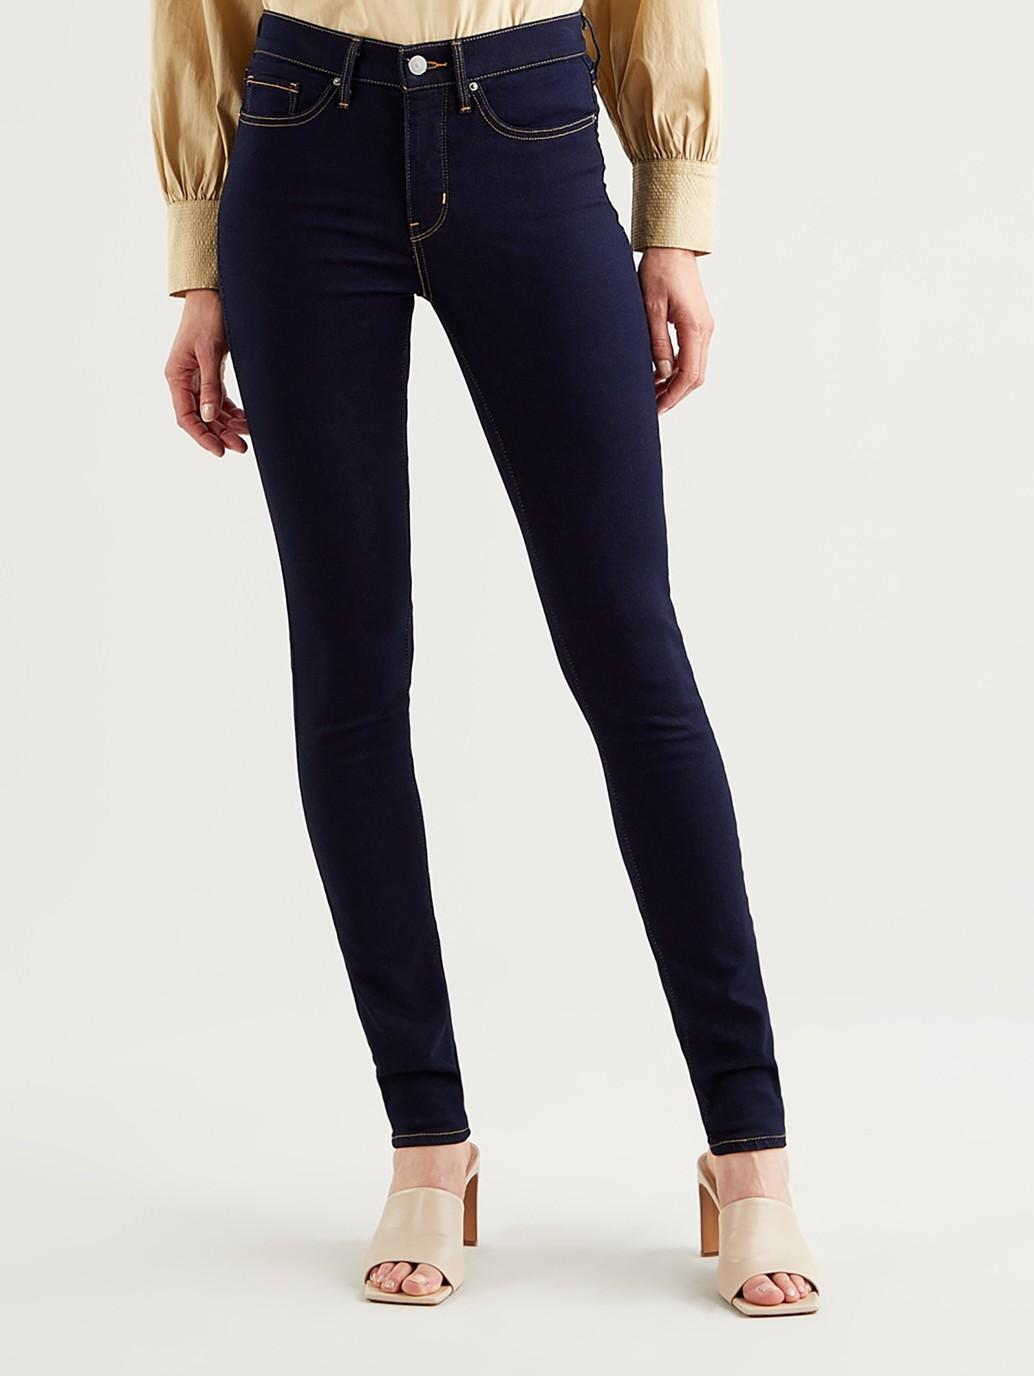 Buy 311 Shaping Skinny Jeans | Levi's® Official Online Store MY